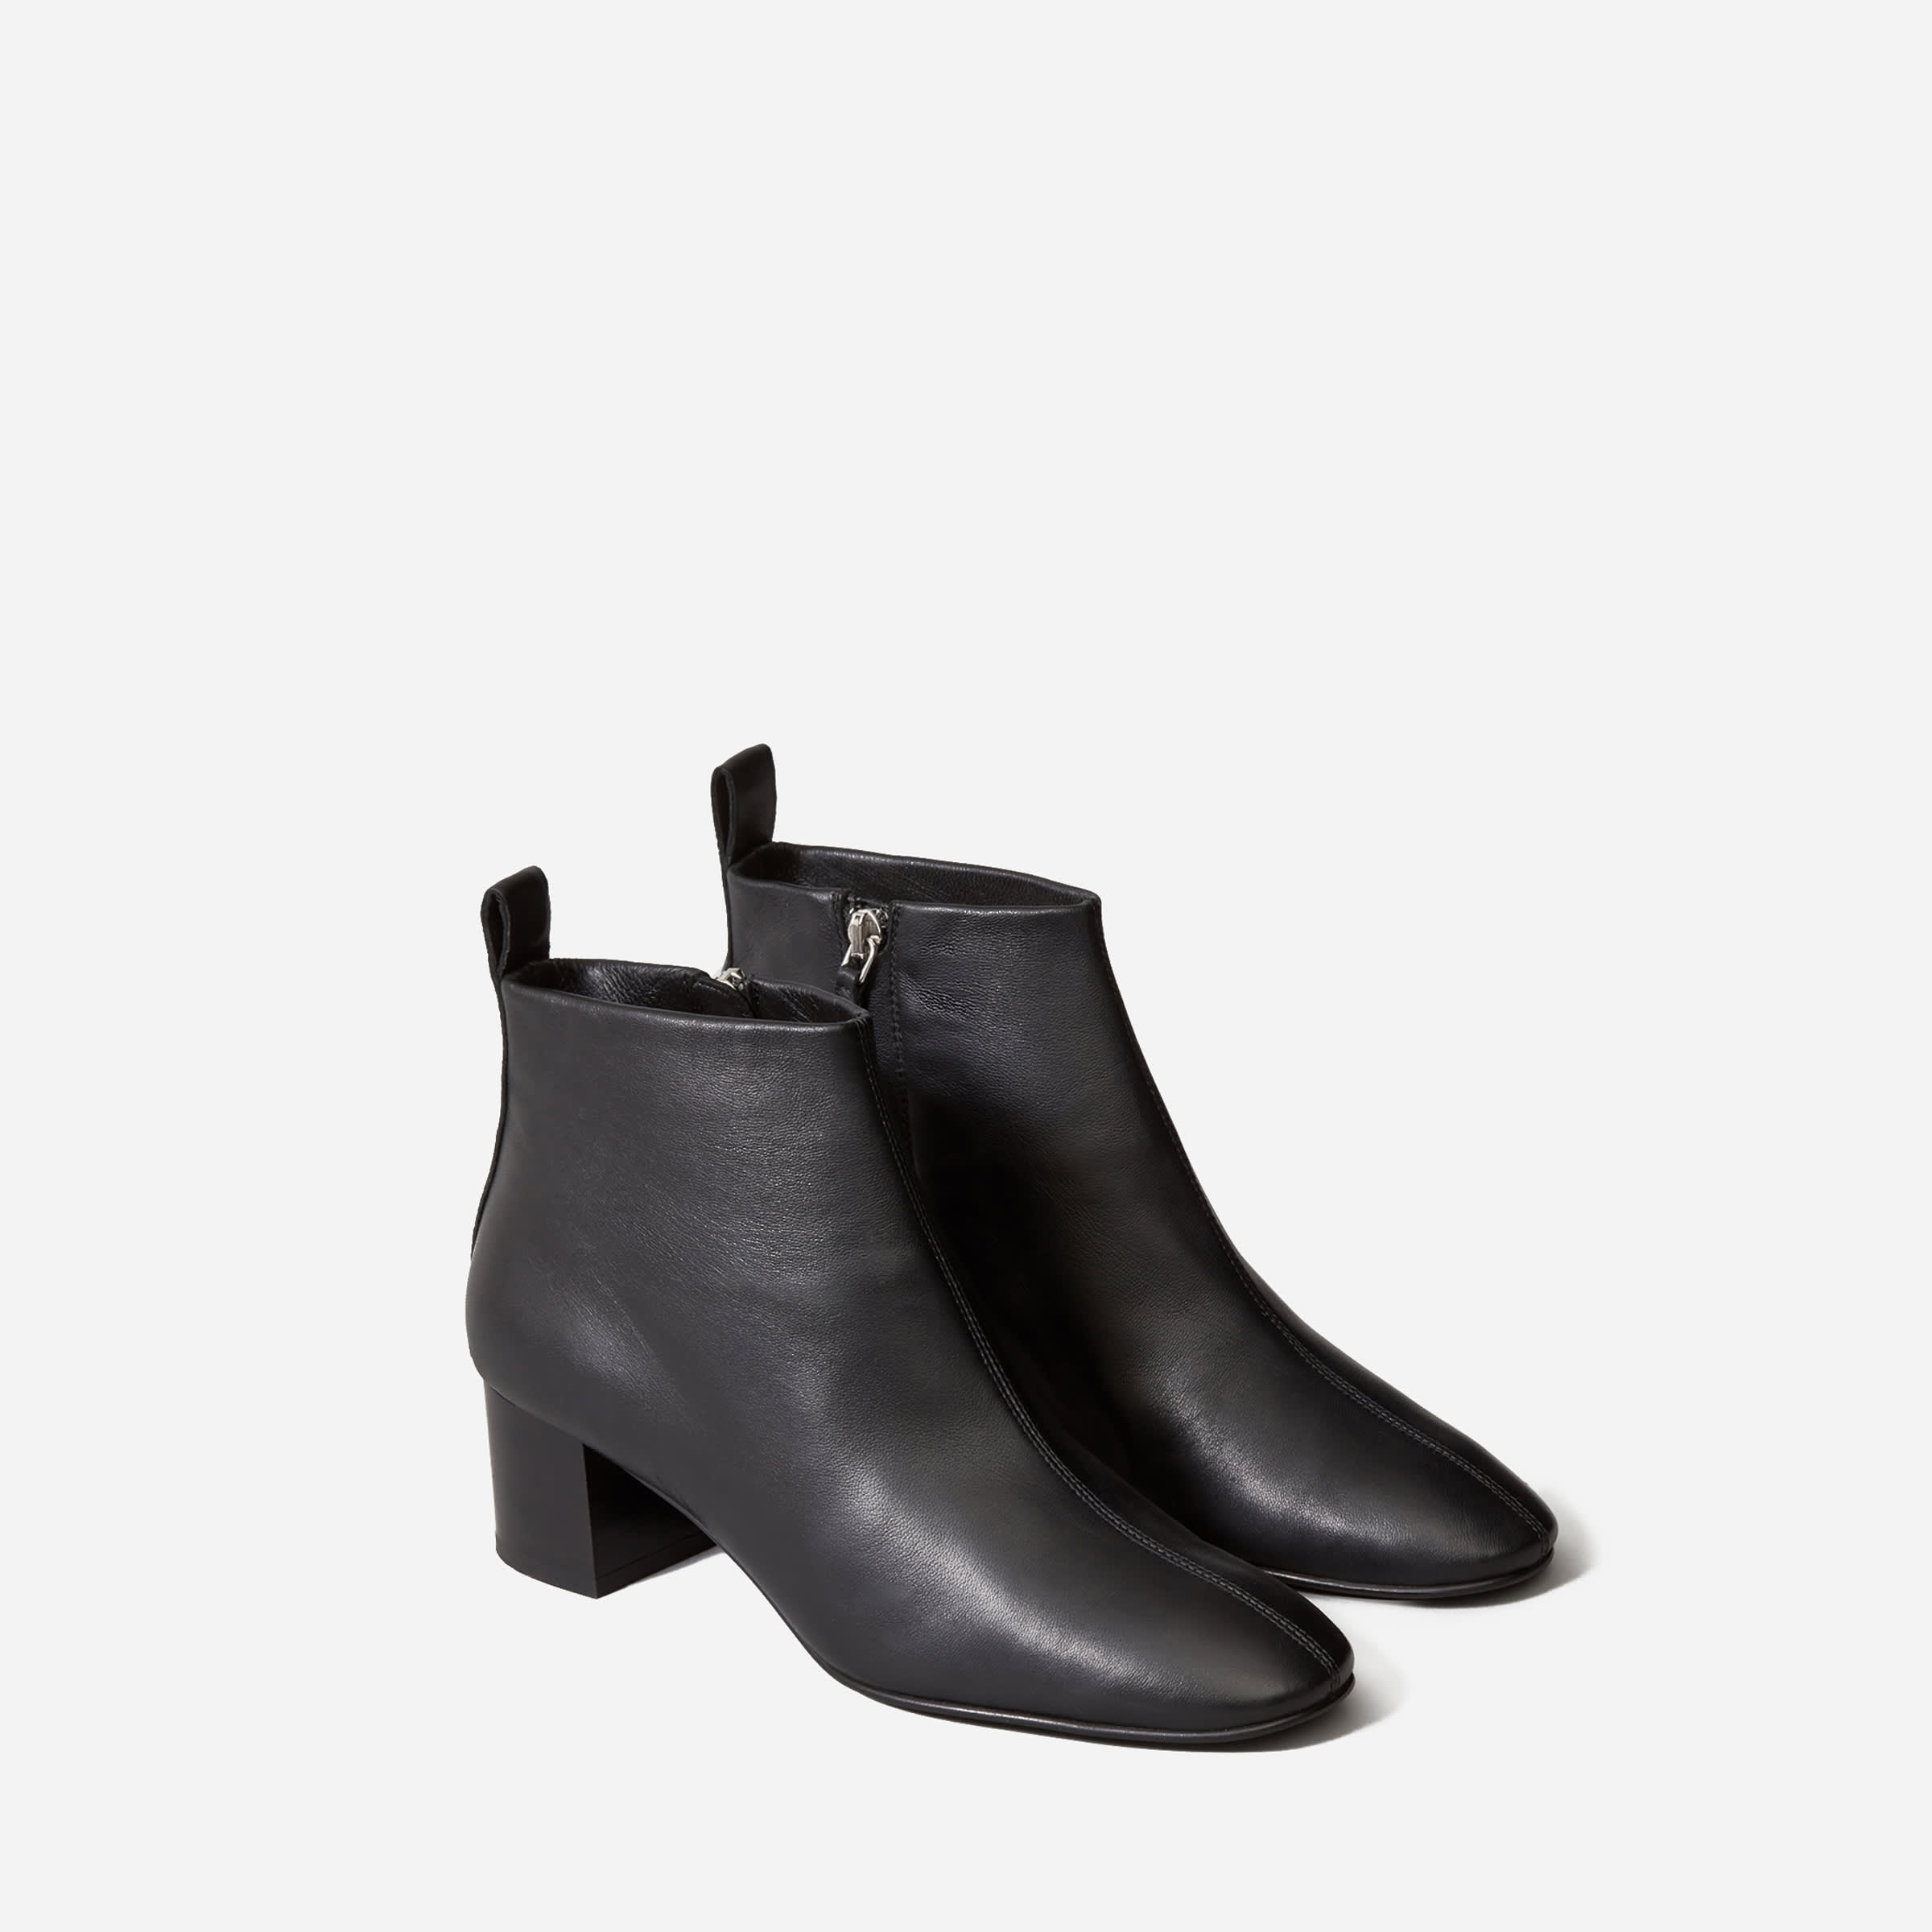 everlane day boots